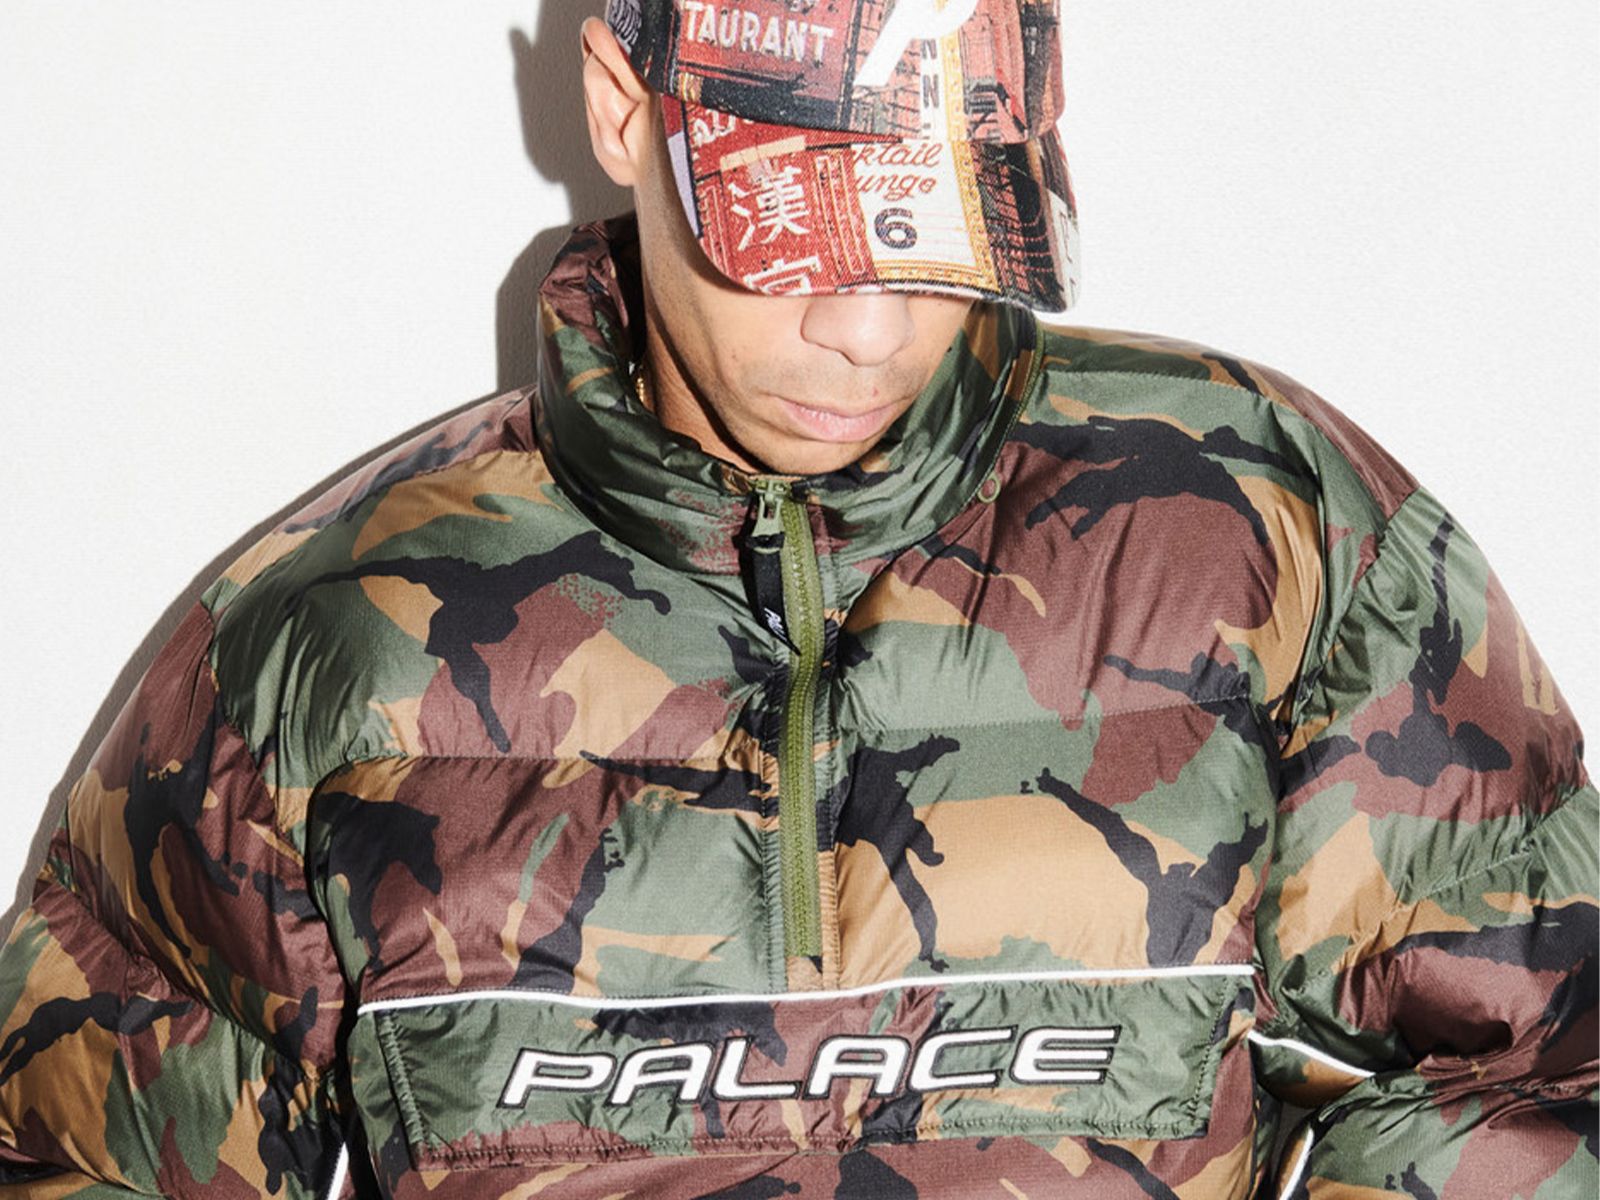 Palace unveils its full lookbook for this season